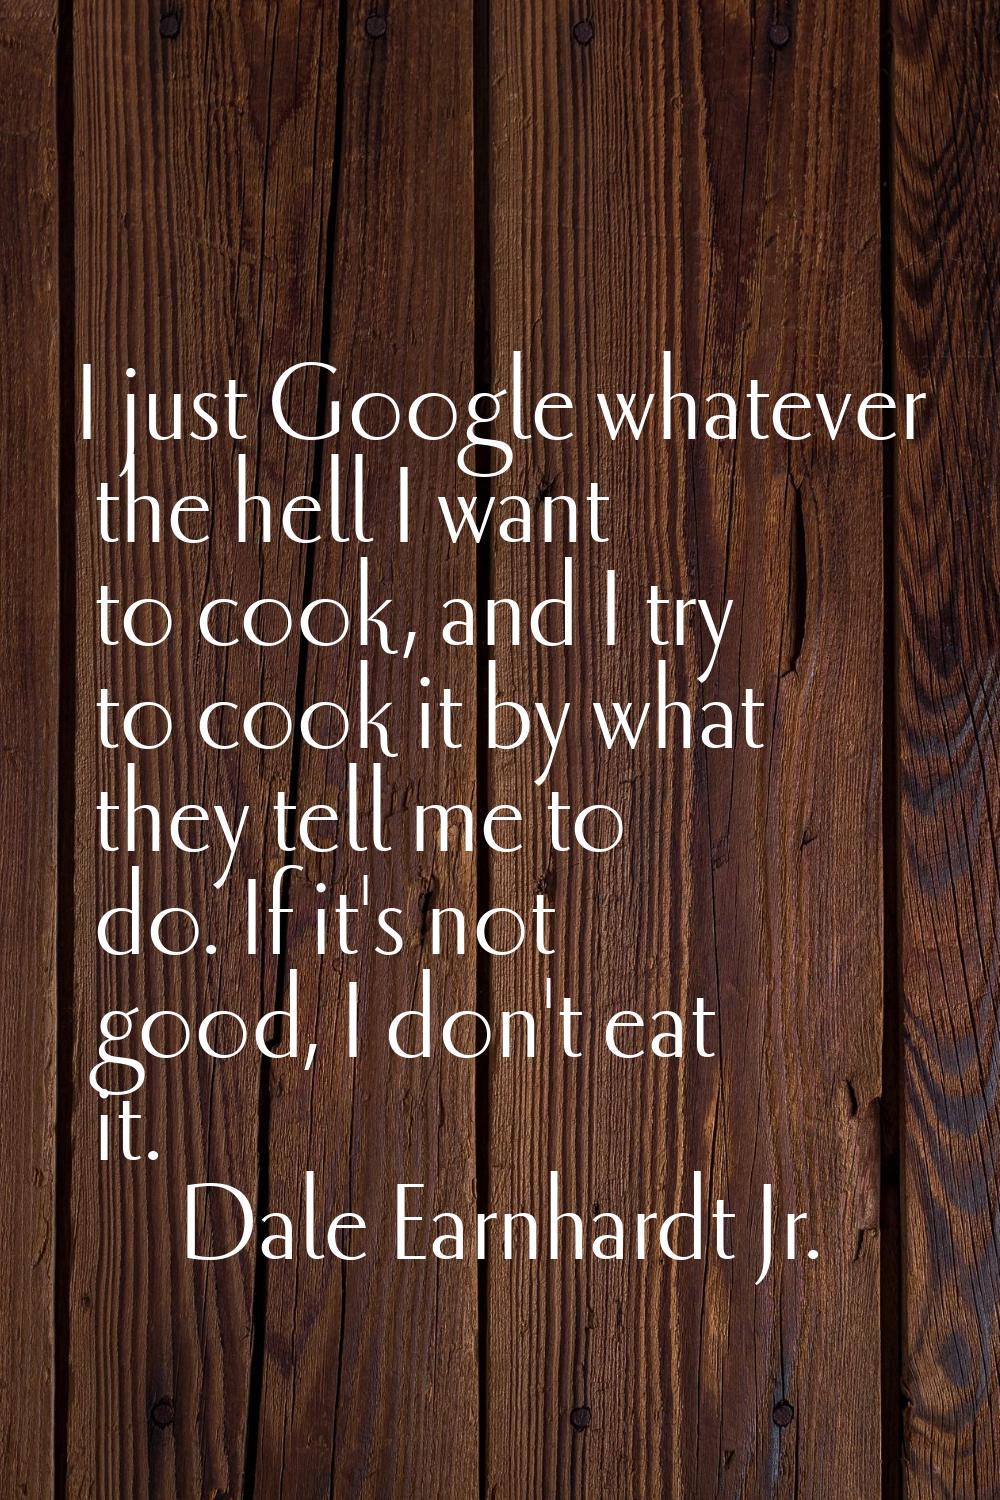 I just Google whatever the hell I want to cook, and I try to cook it by what they tell me to do. If